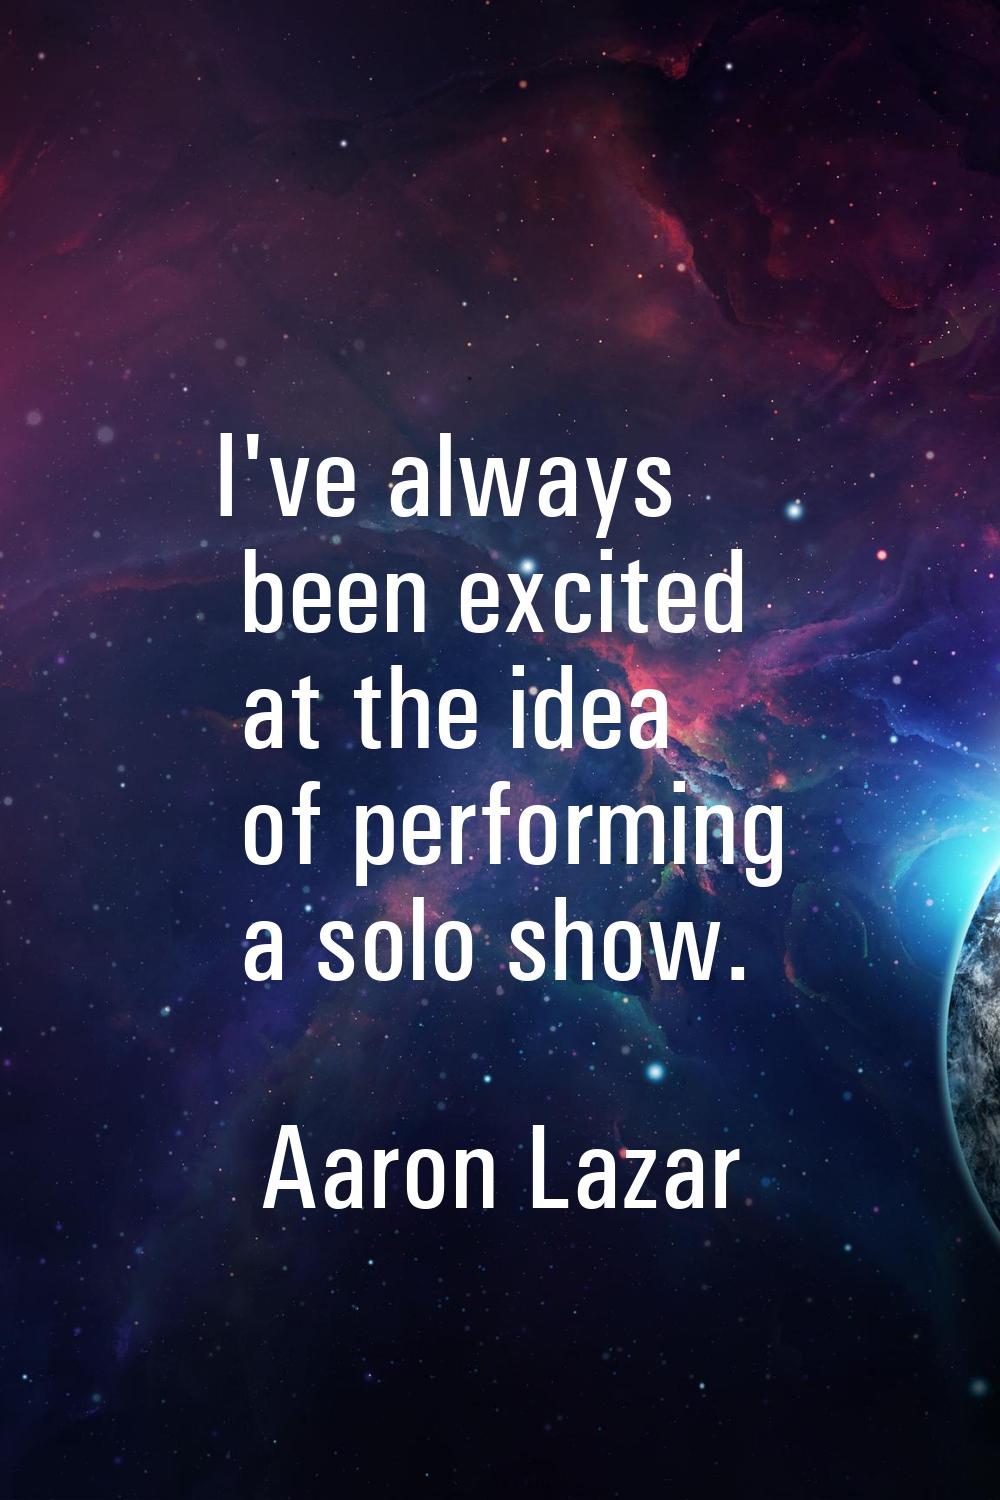 I've always been excited at the idea of performing a solo show.